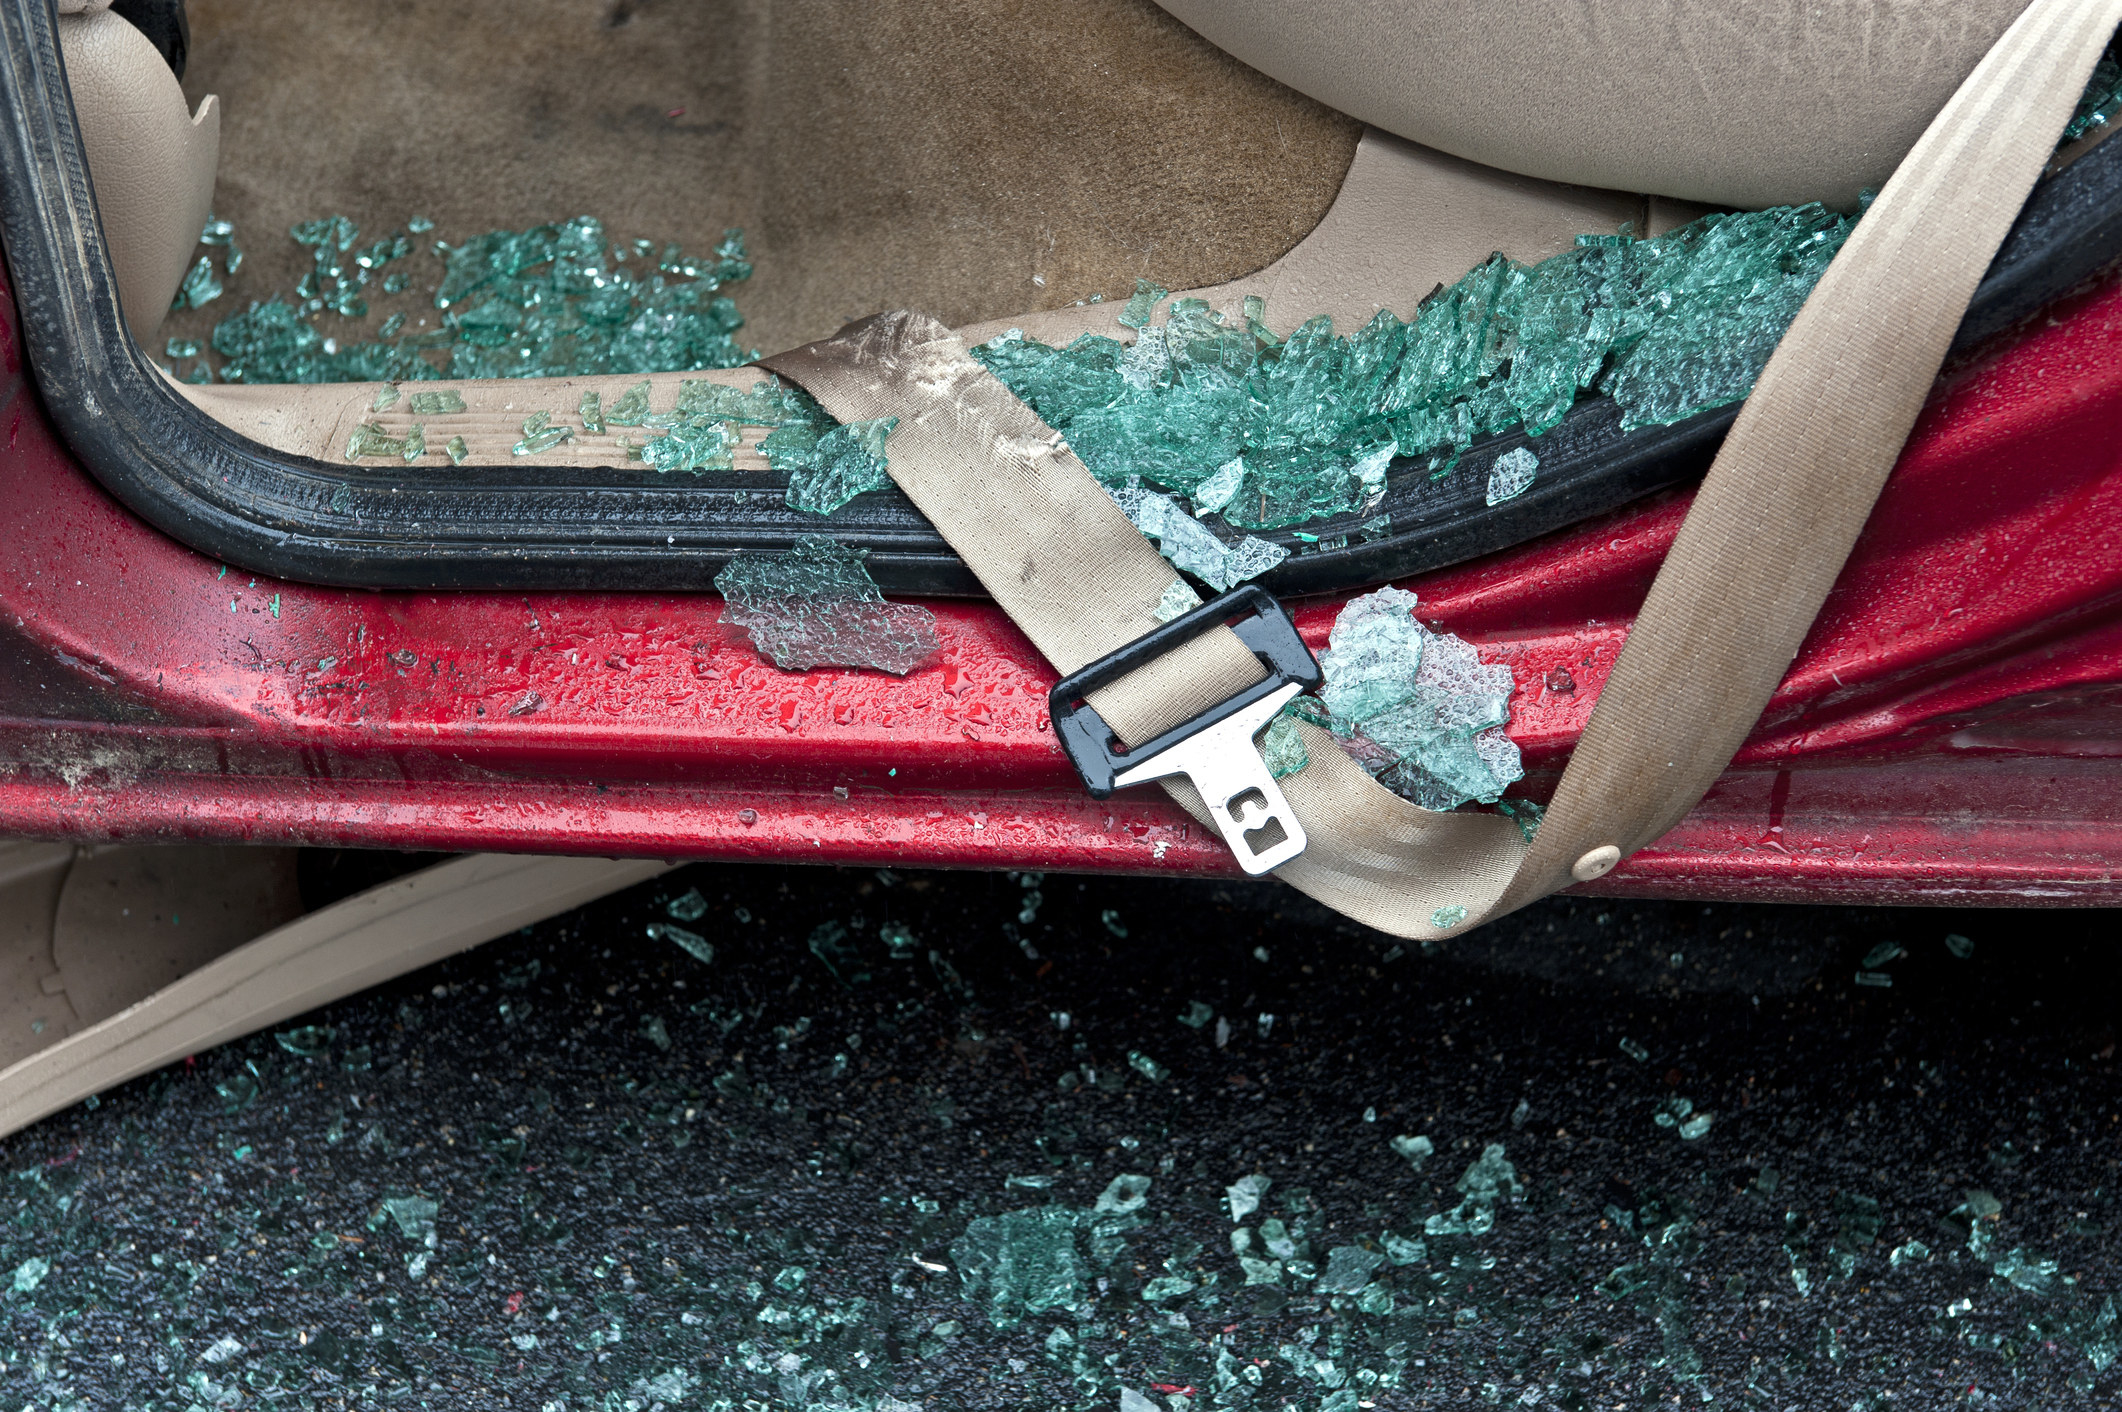 seatbelt surrounded by broken glass